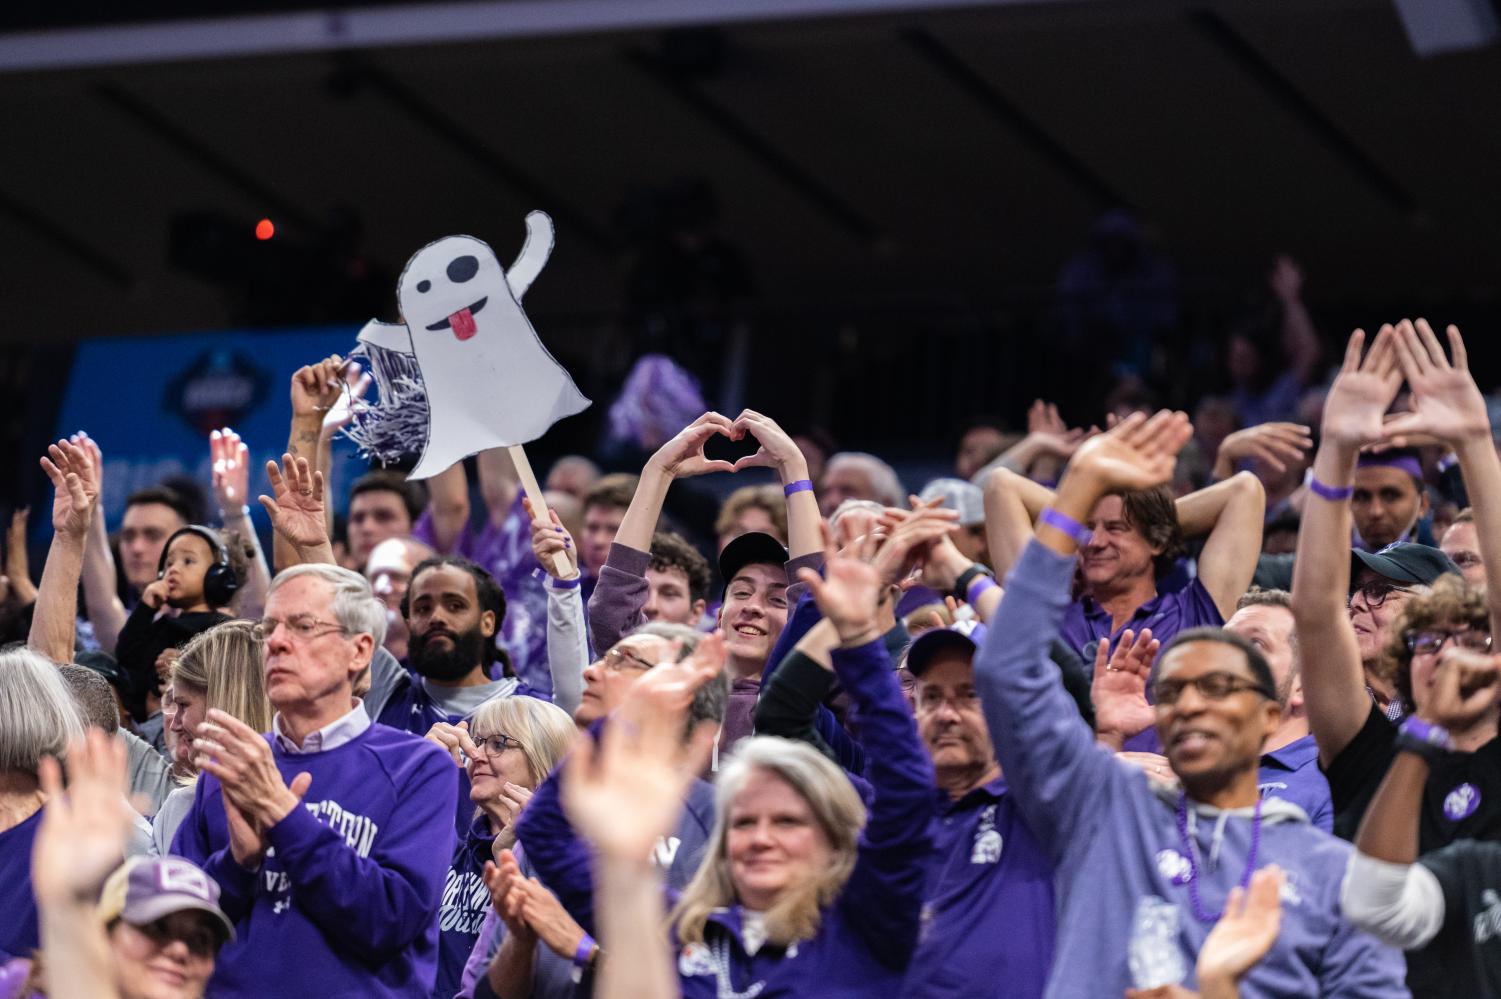 A crowd, mostly dressed in purple, cheers from the stands. One audience member makes a heart with their hands.